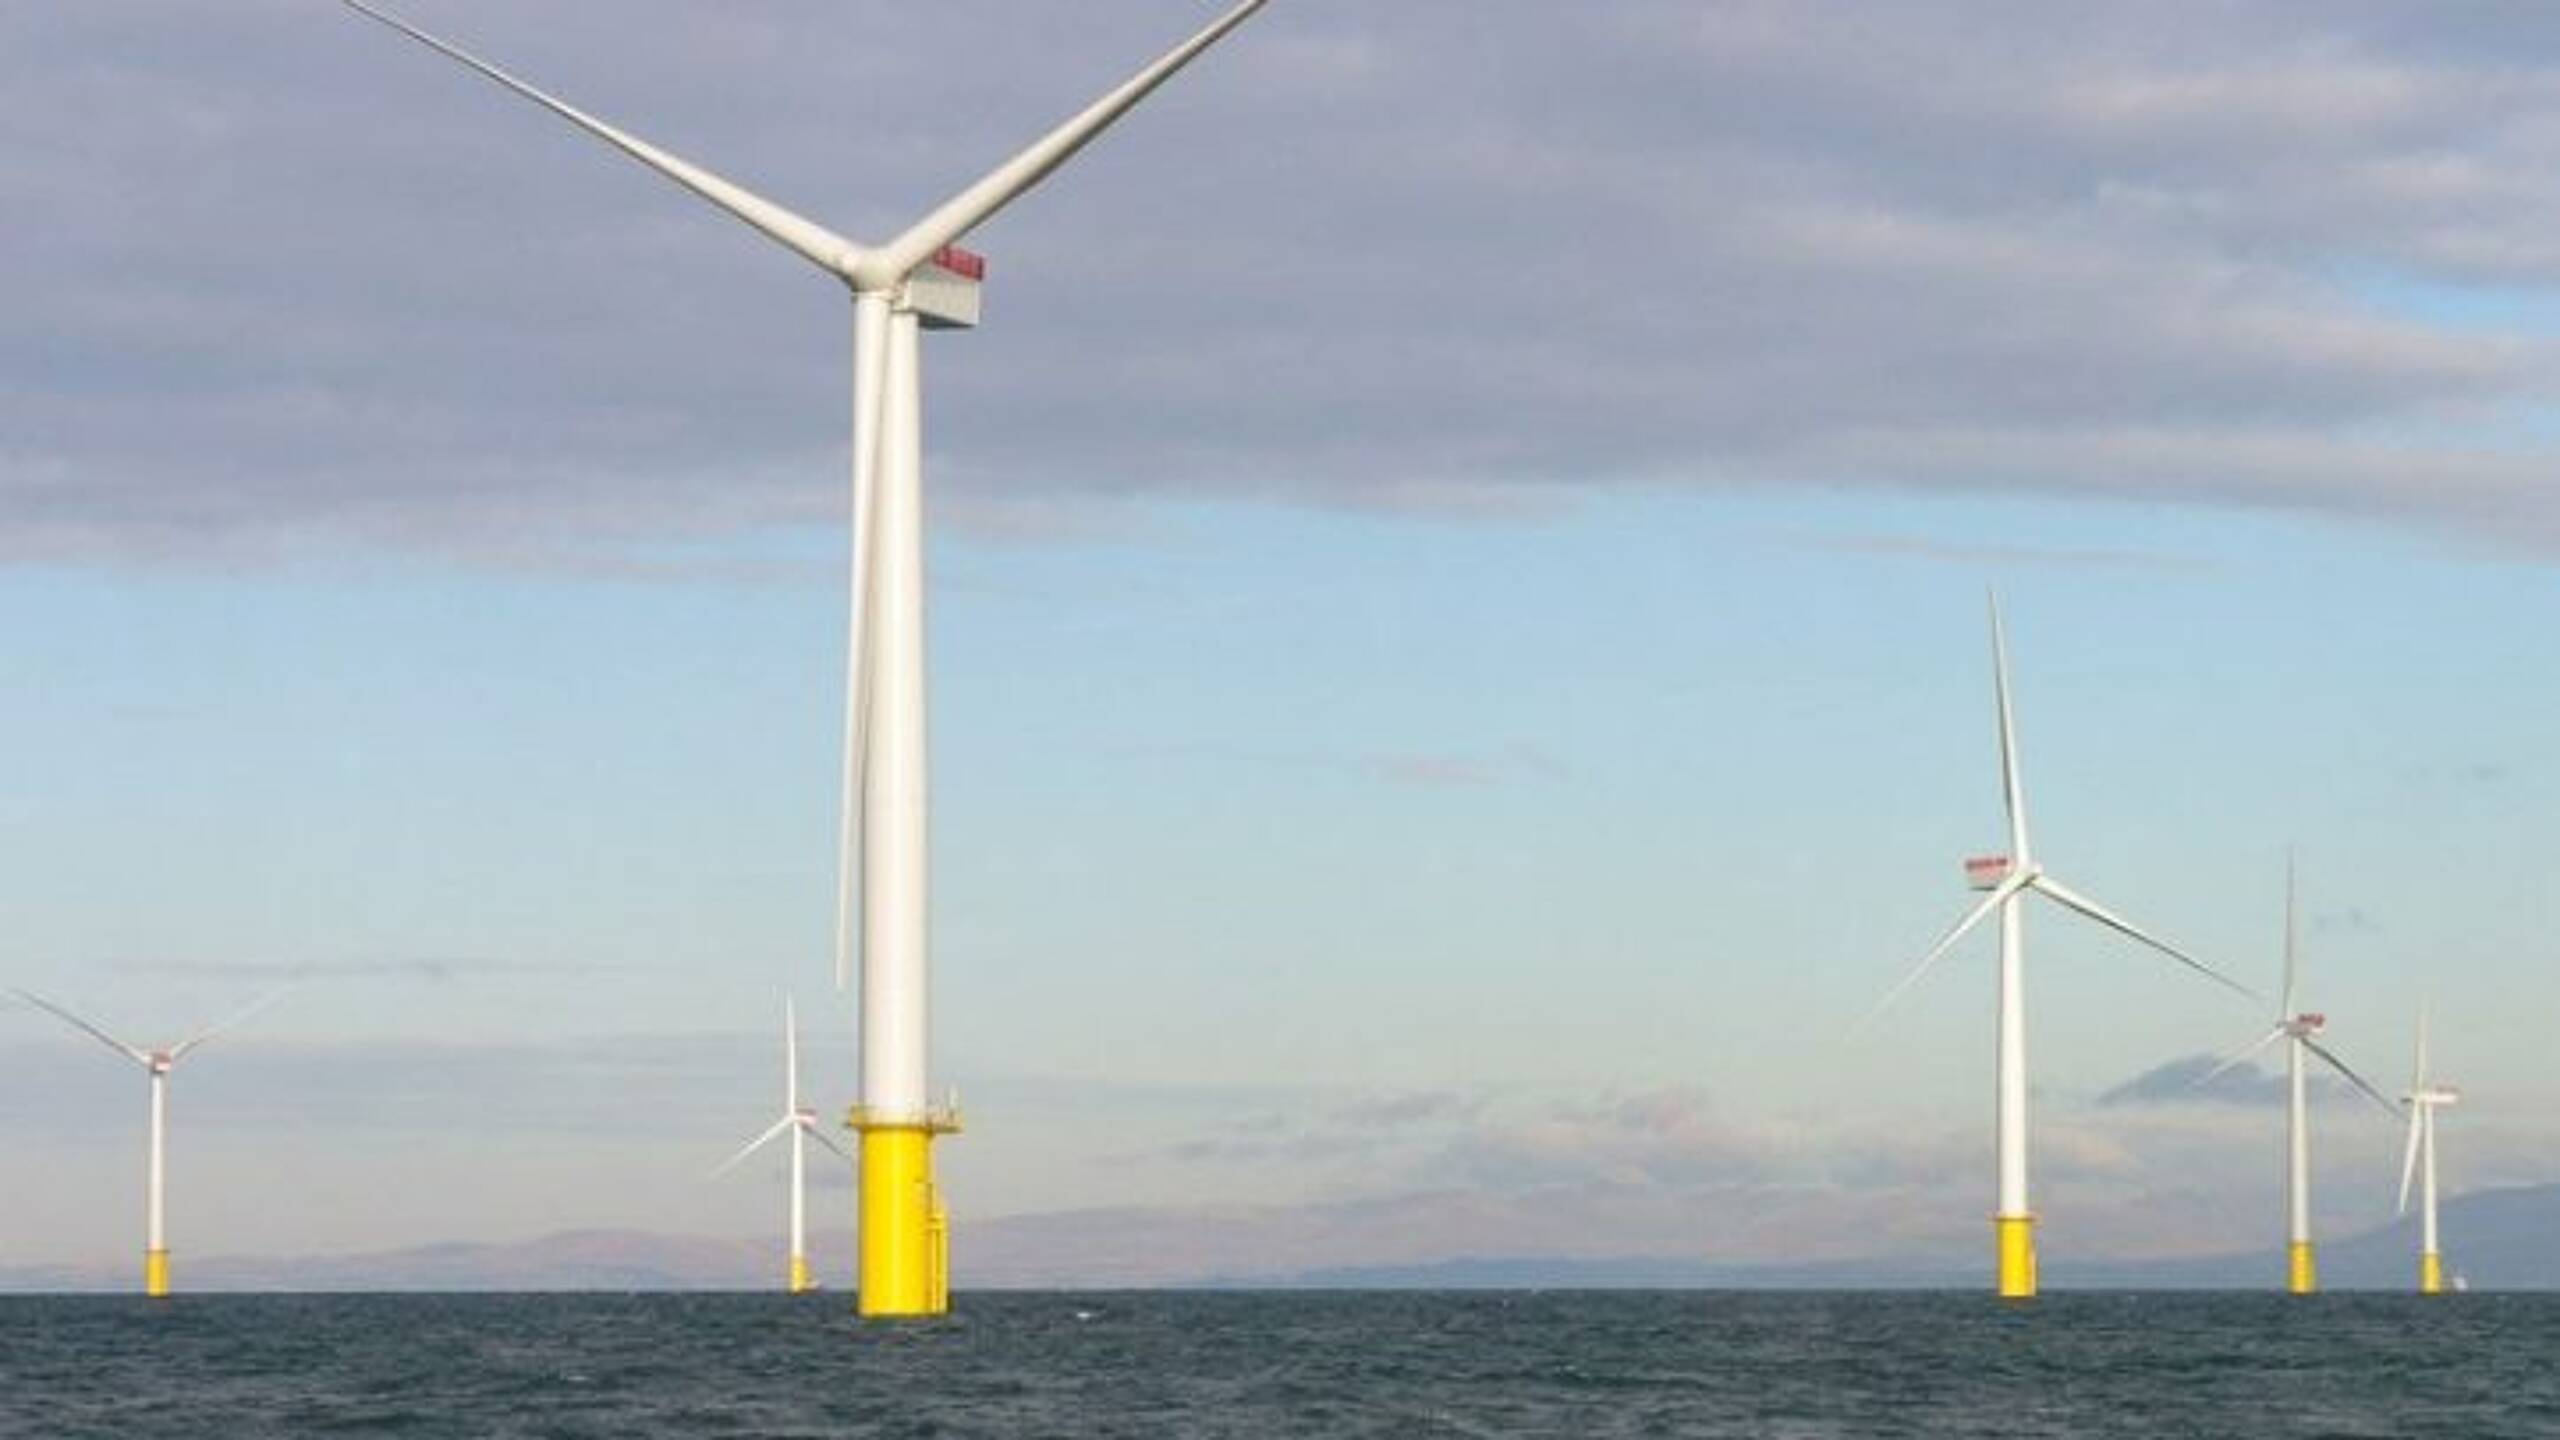 The UK should lead the G7 in the push for wind